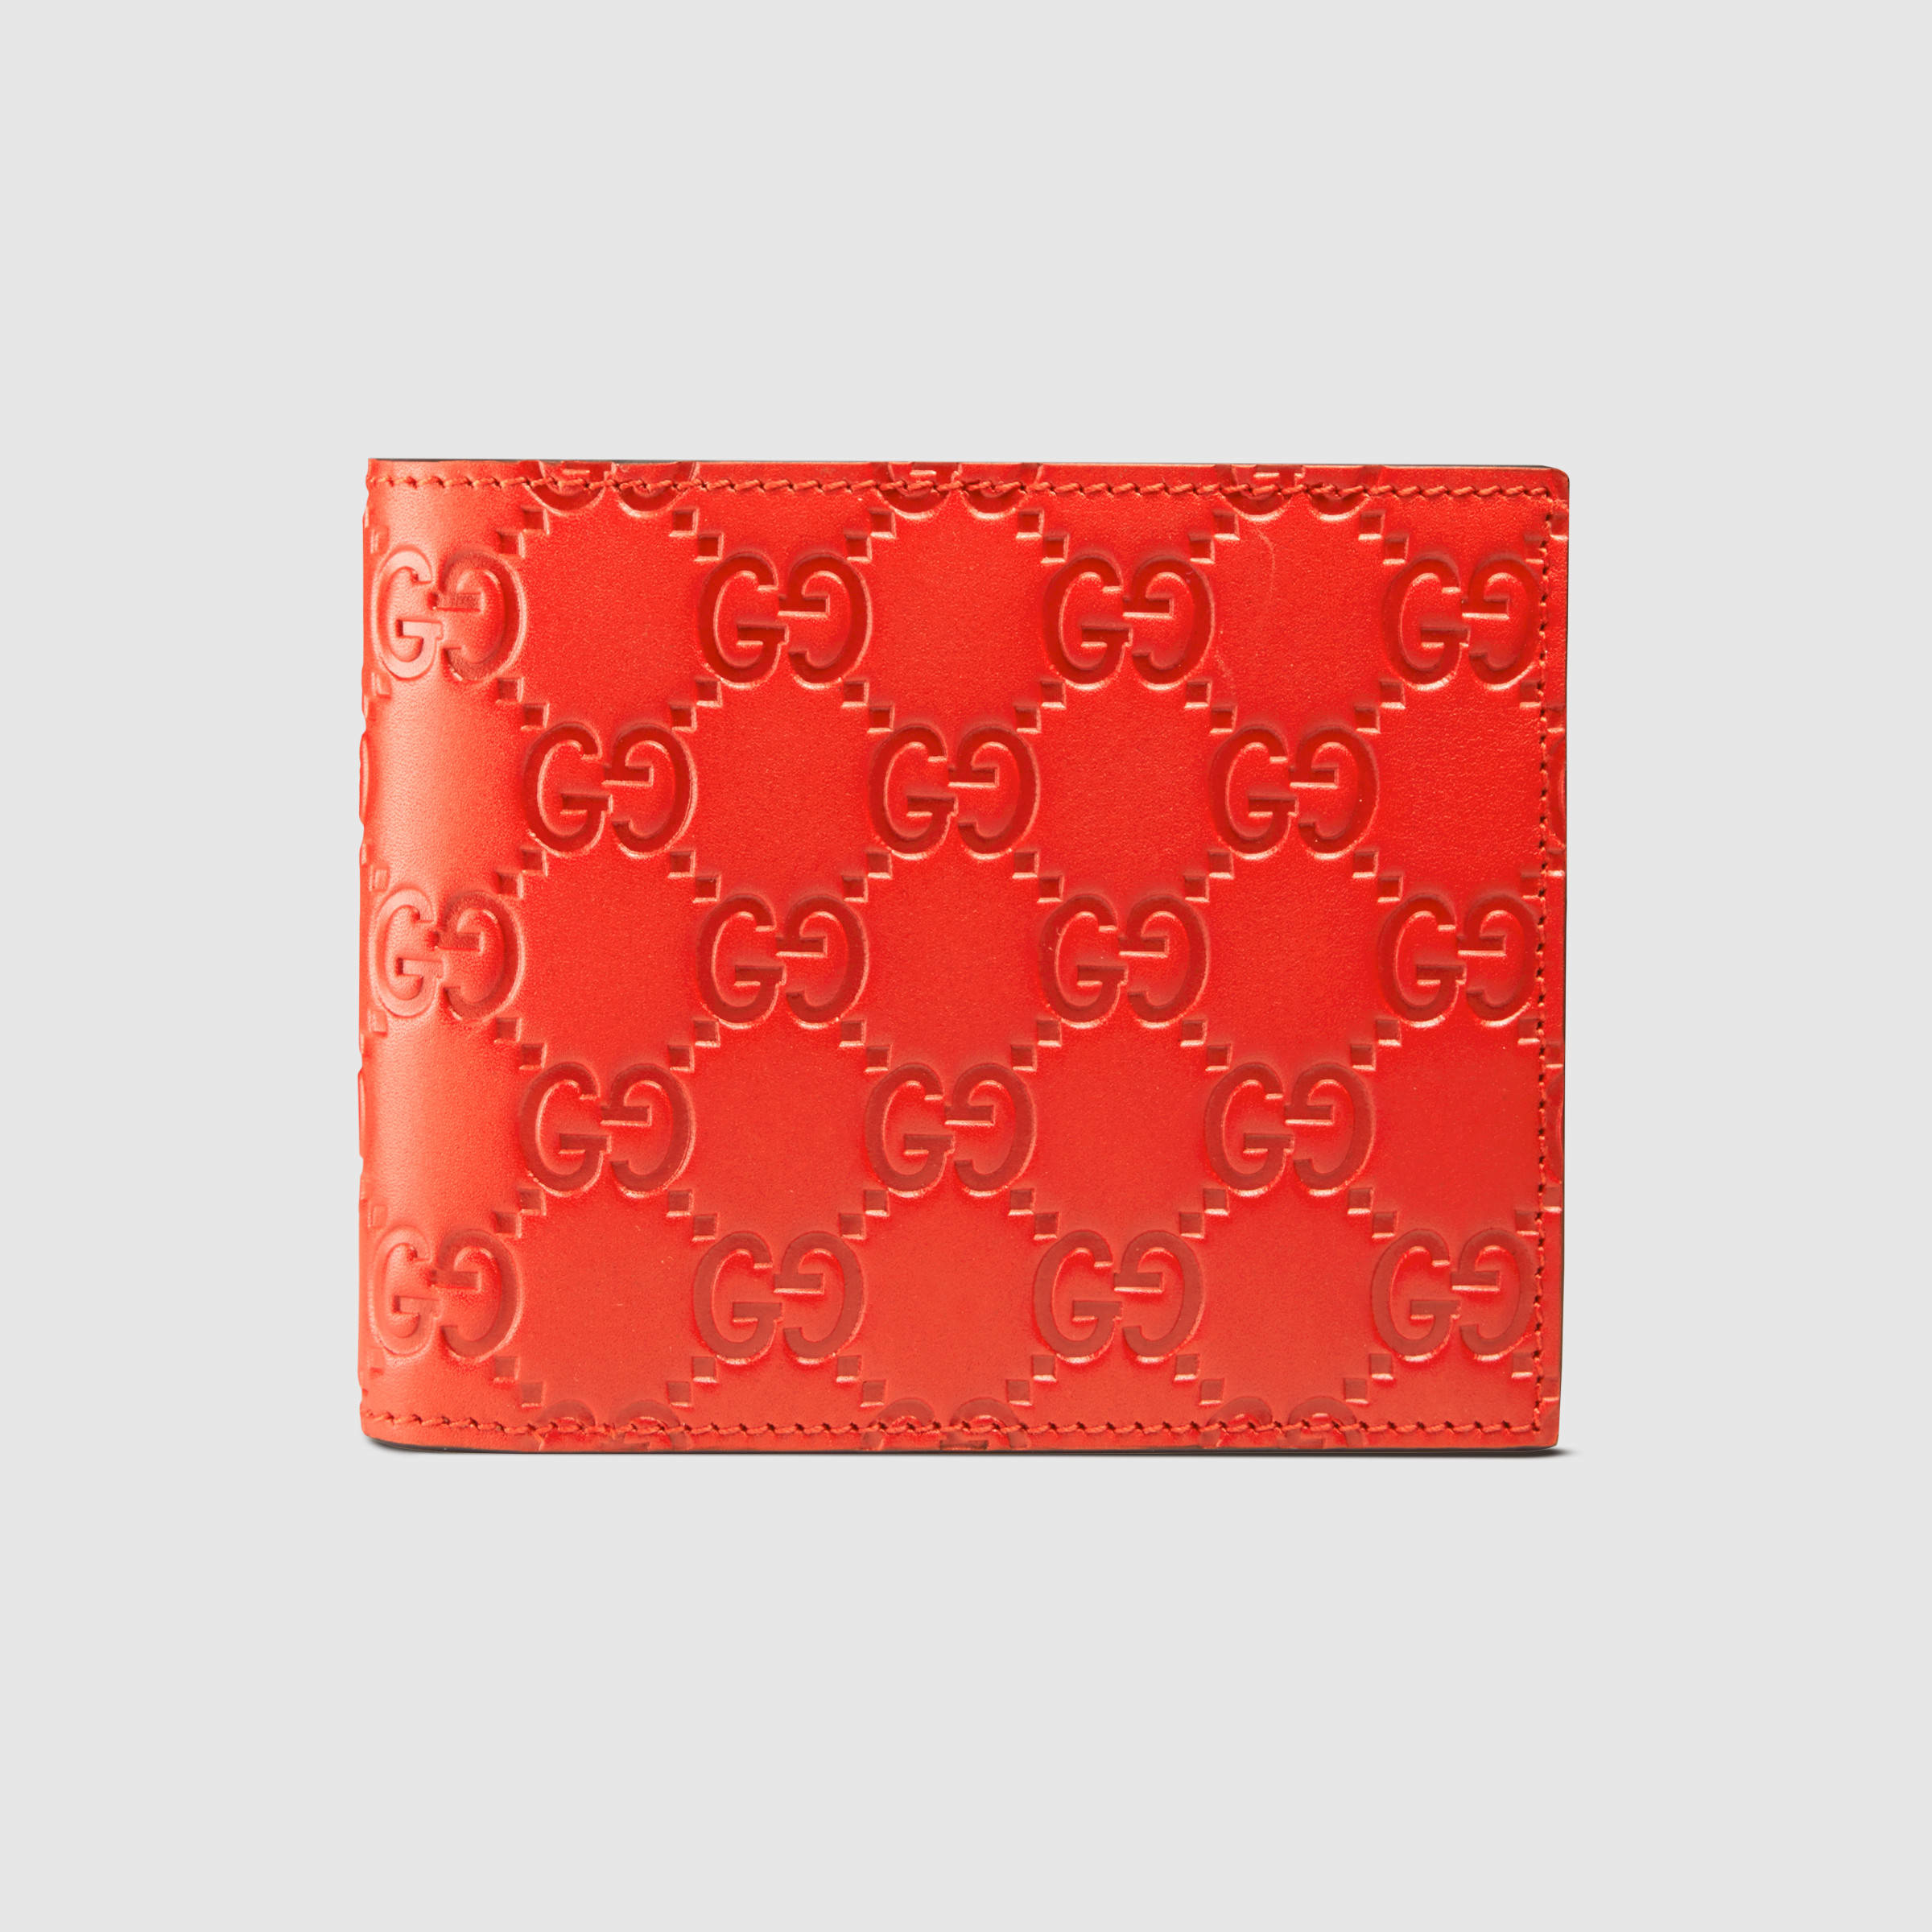 Gucci Leather Signature Wallet in Red for Men - Lyst